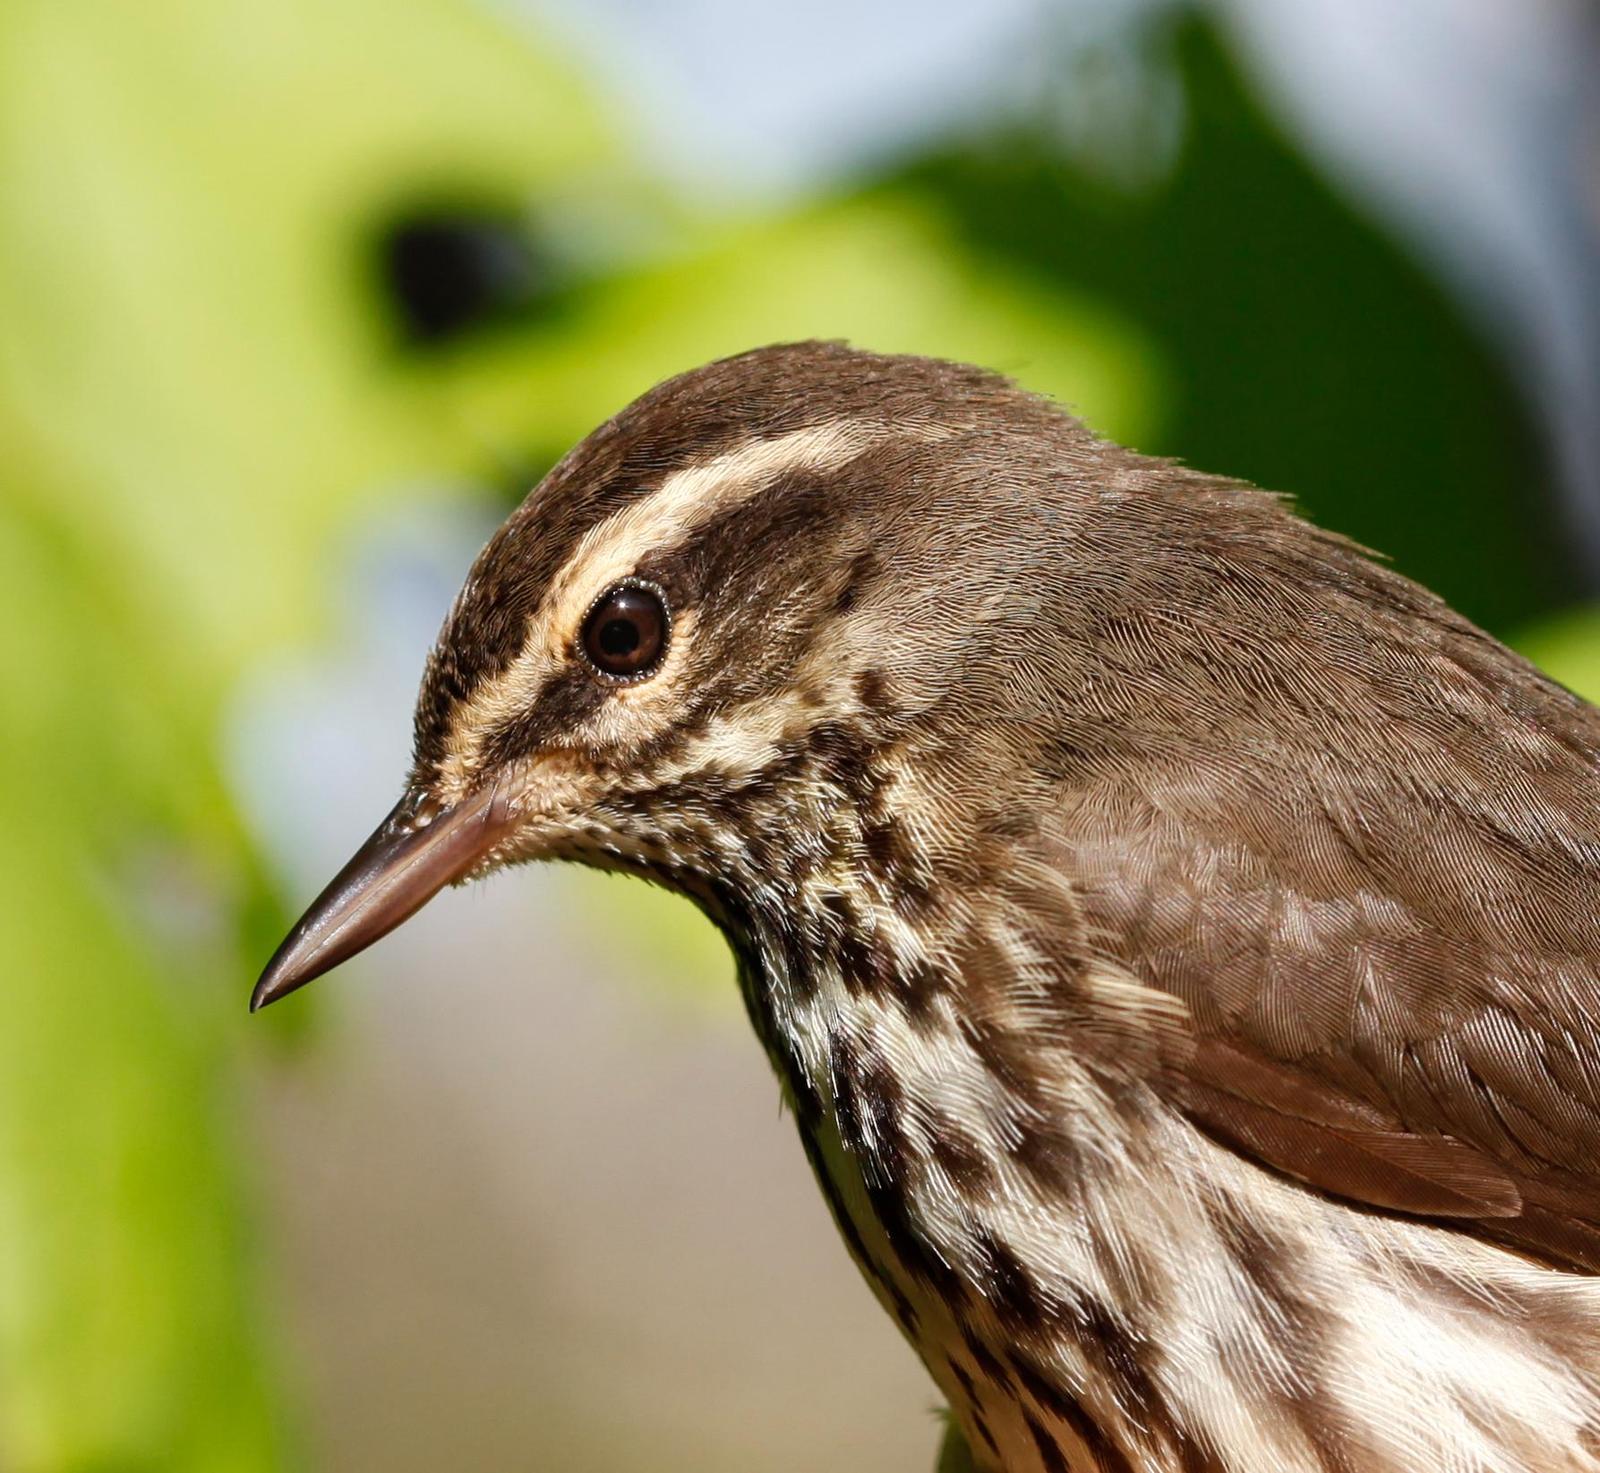 Northern Waterthrush Photo by Lucy Wightman